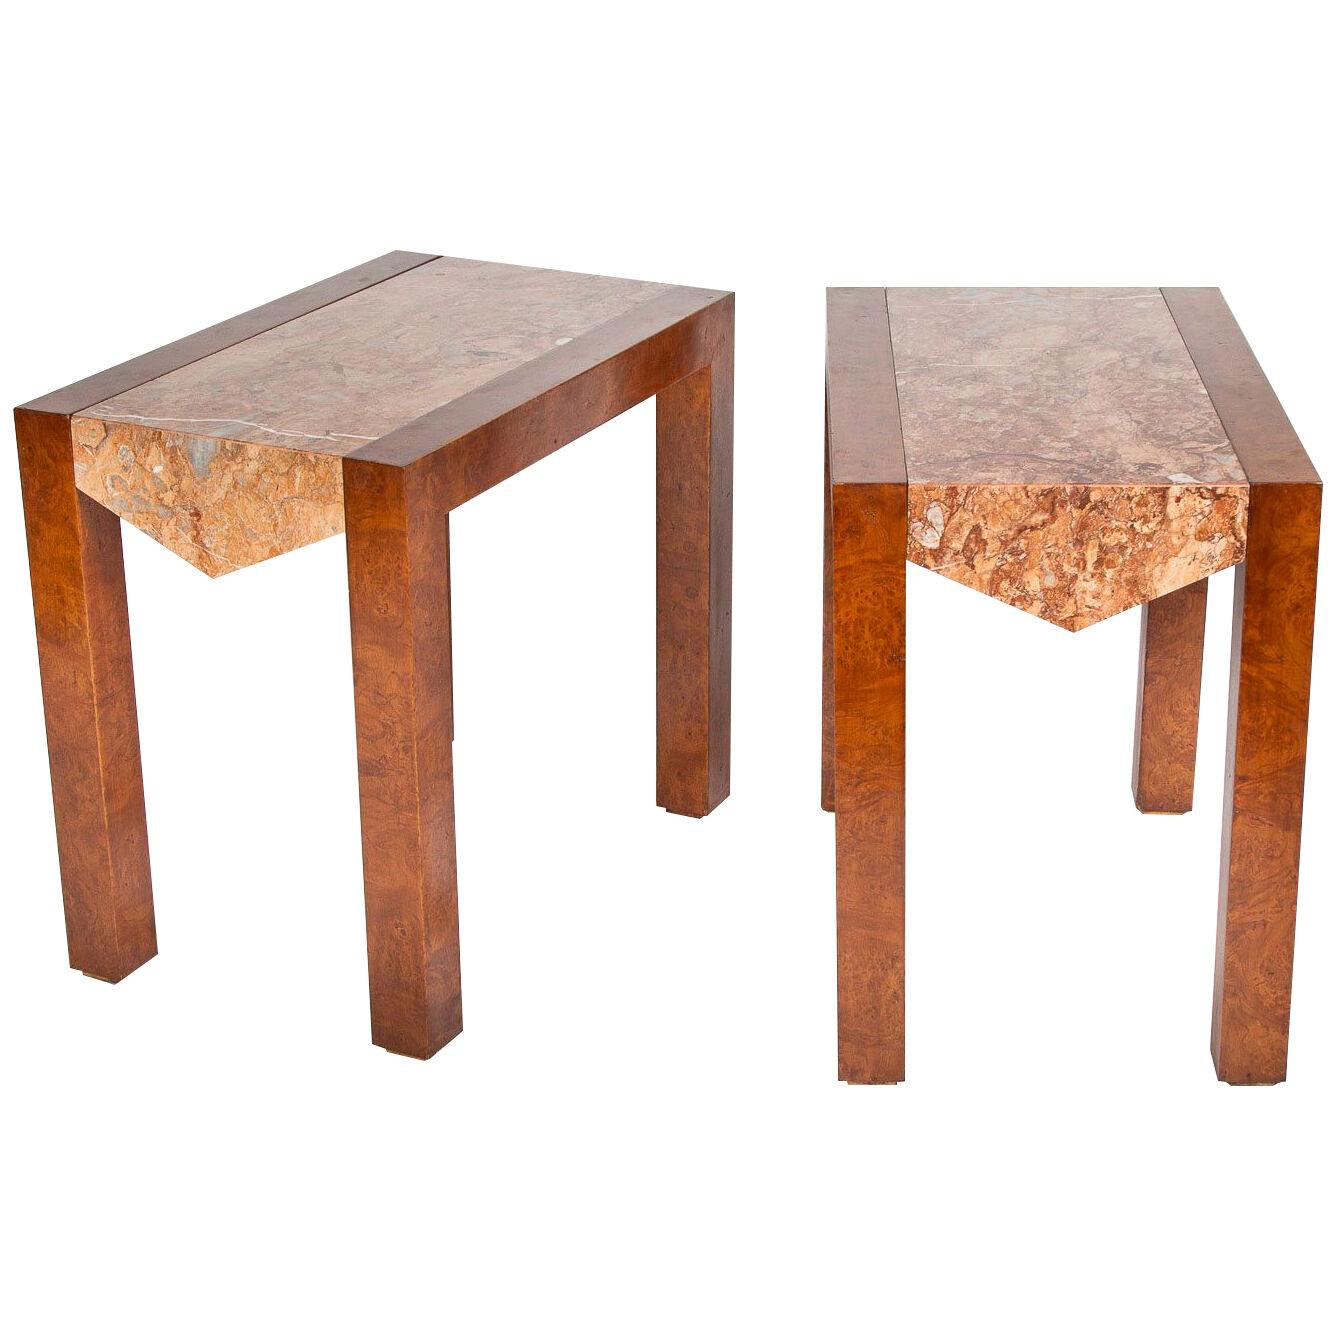 Amboyna side tables with marble tops by Pascua Ortega